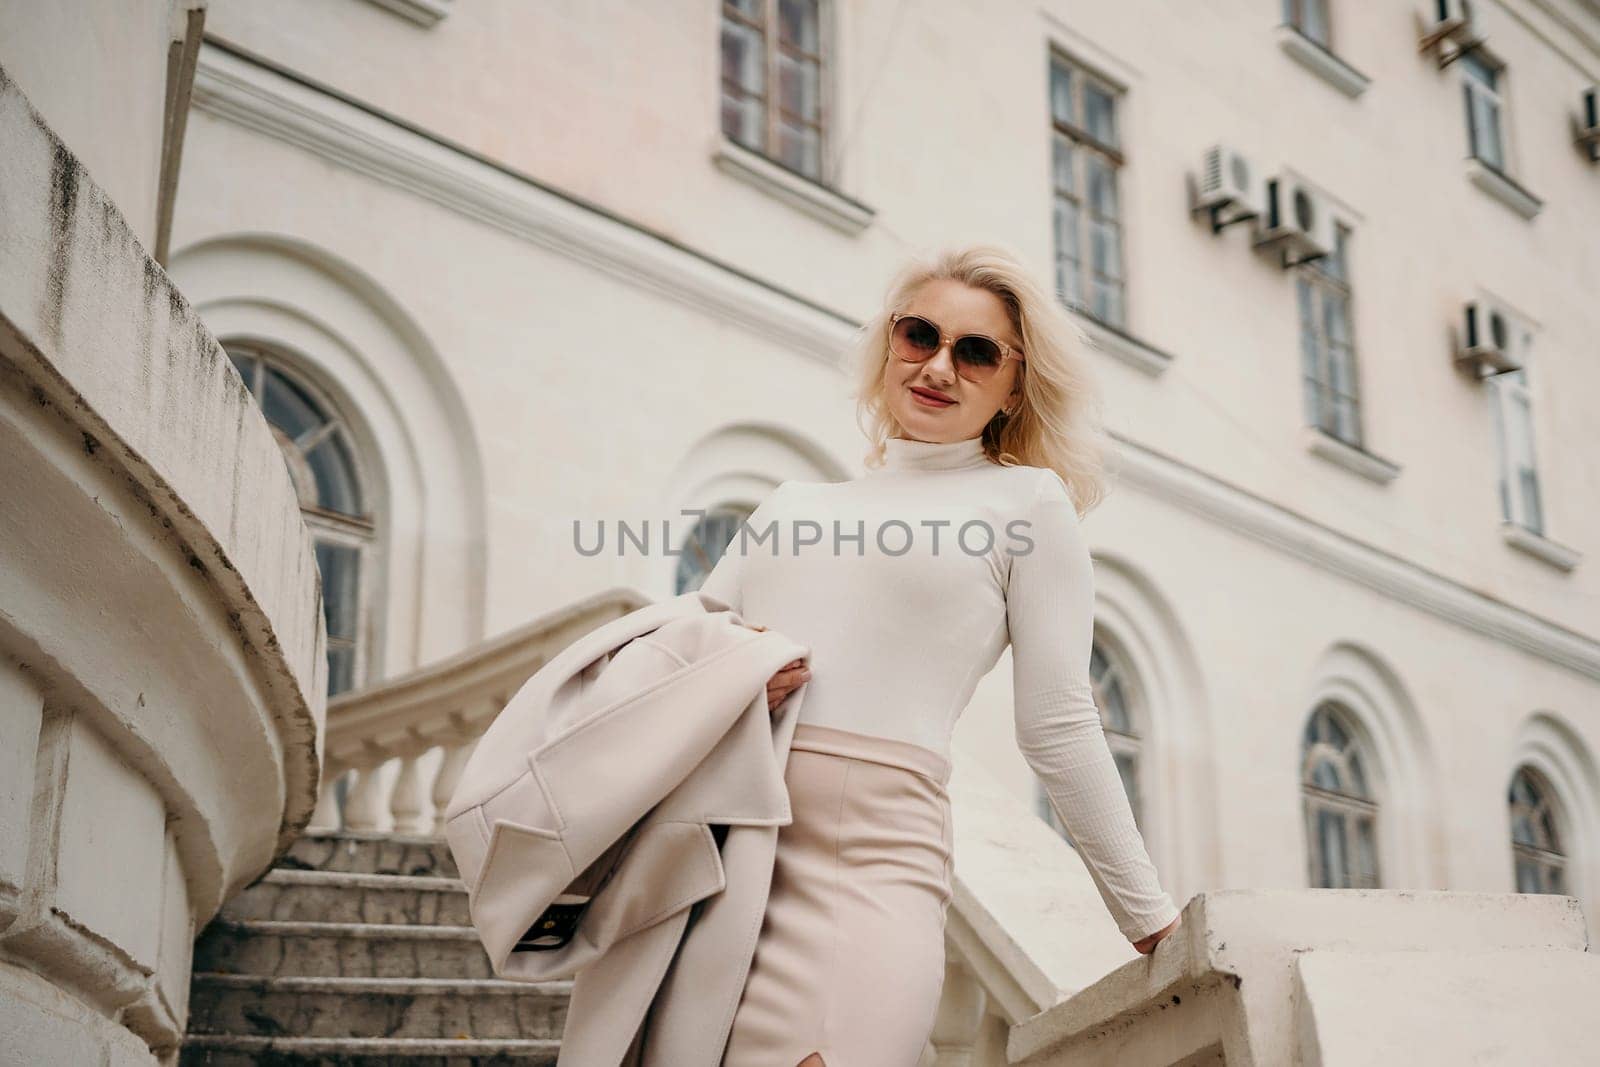 A woman wearing a white shirt and skirt is standing on a staircase in front of a building. She is holding a handbag and she is posing for a photo. Concept of elegance and sophistication